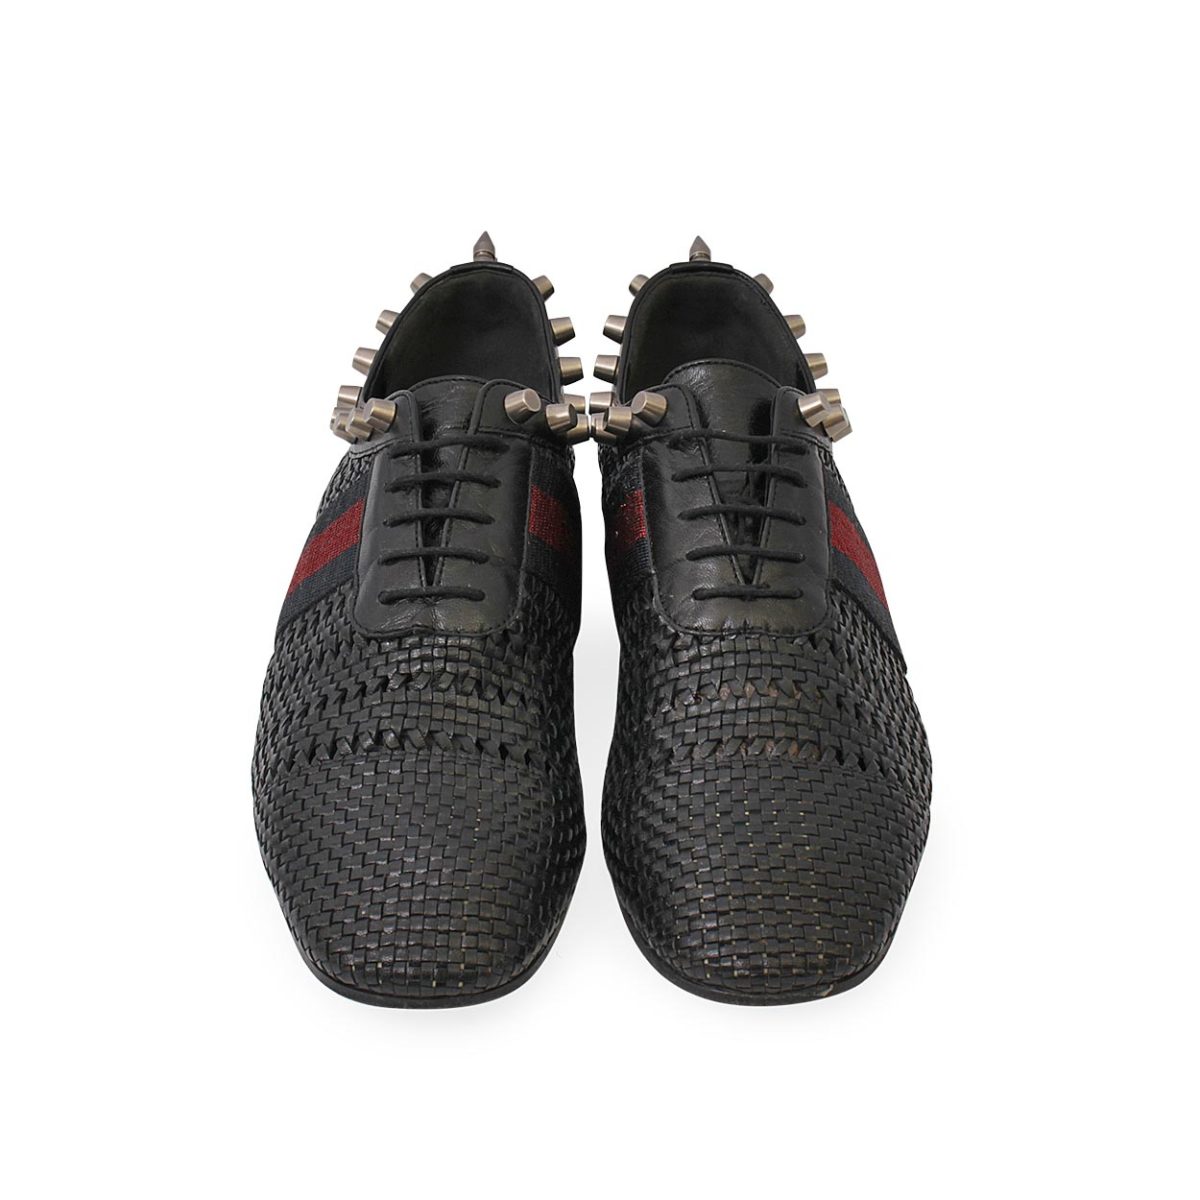 spiked gucci shoes